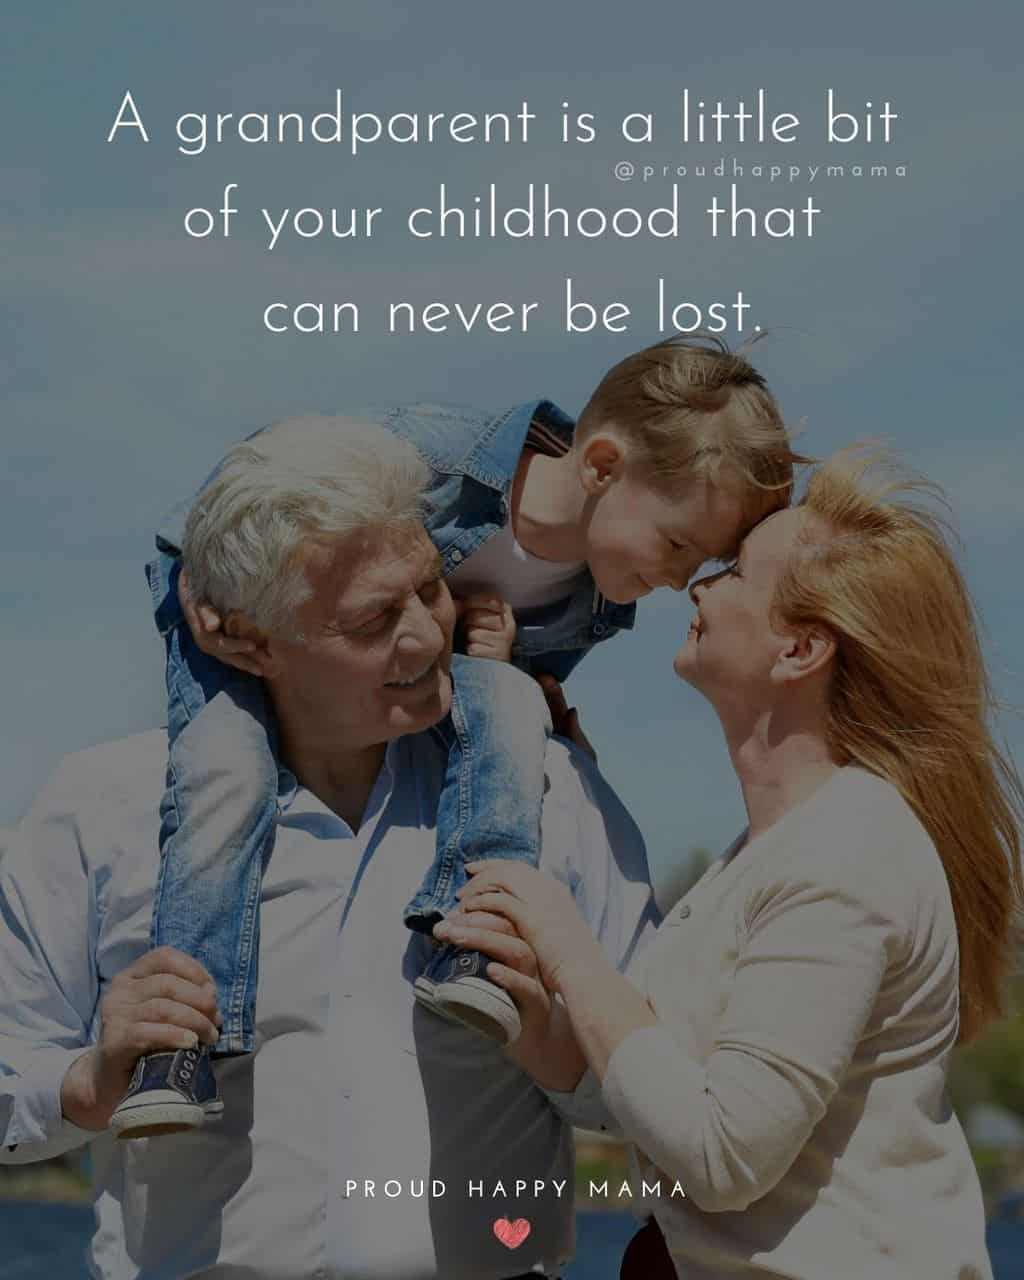 Grandparent Quotes – A lot of my favorite childhood memories with my grandparents are not stored in photos, but in certain